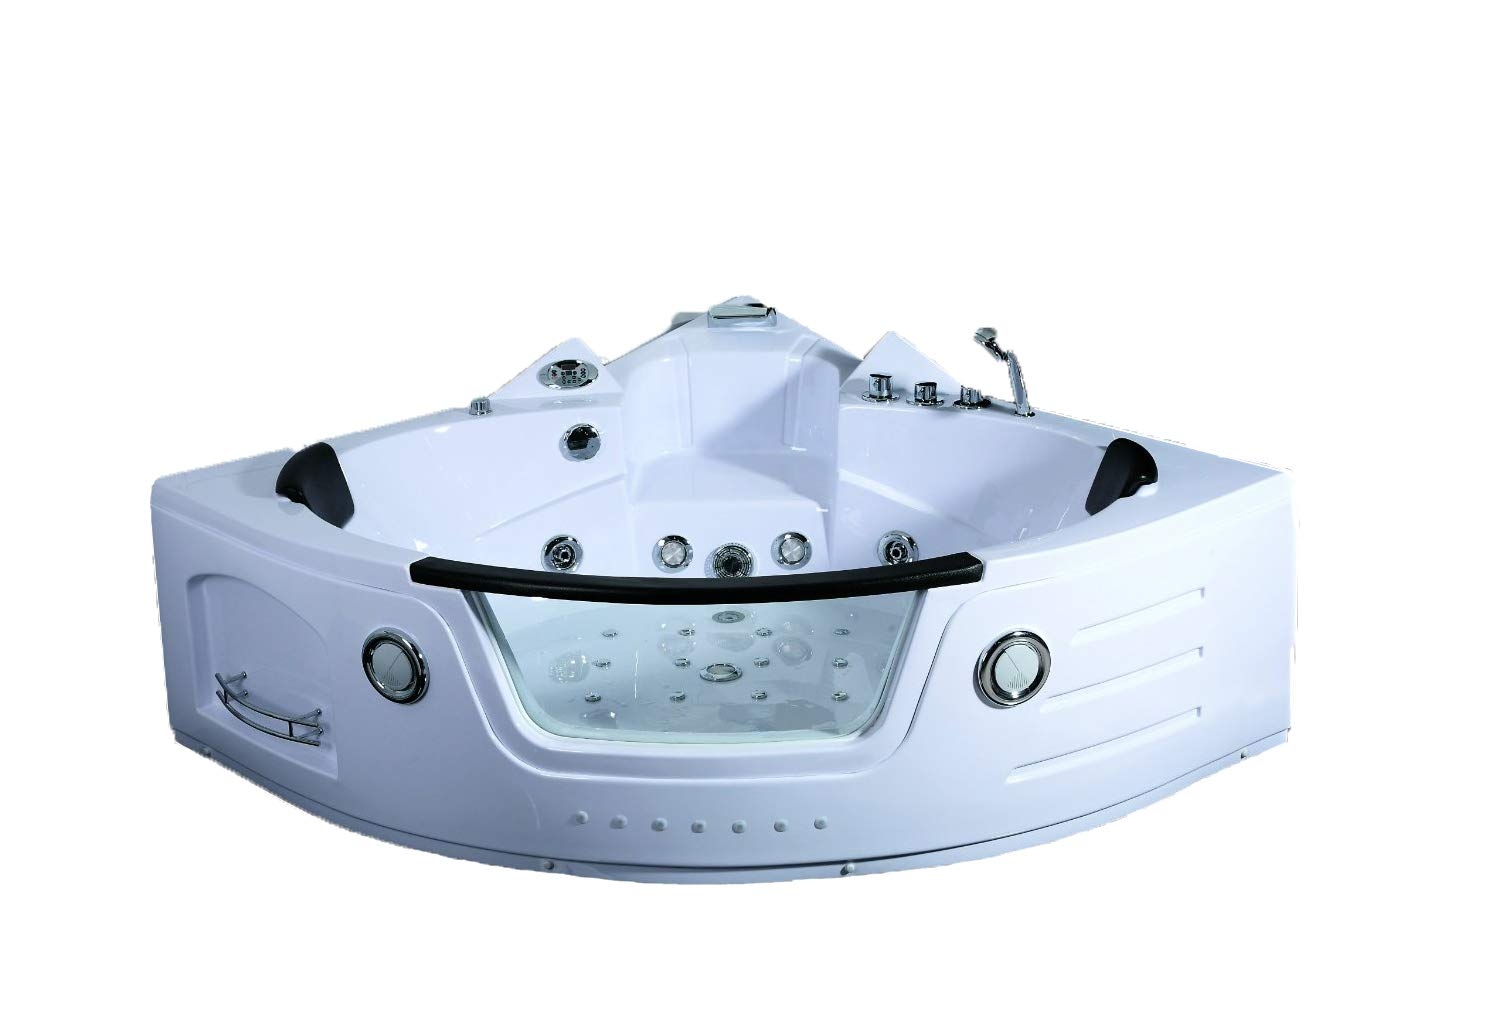 https://visualhunt.com/photos/11/2-person-whirlpool-massage-hydrotherapy-white-corner-bathtub-tub-with-bluetooth-remote-control-inline-water-heater-and-shower-wand.jpg